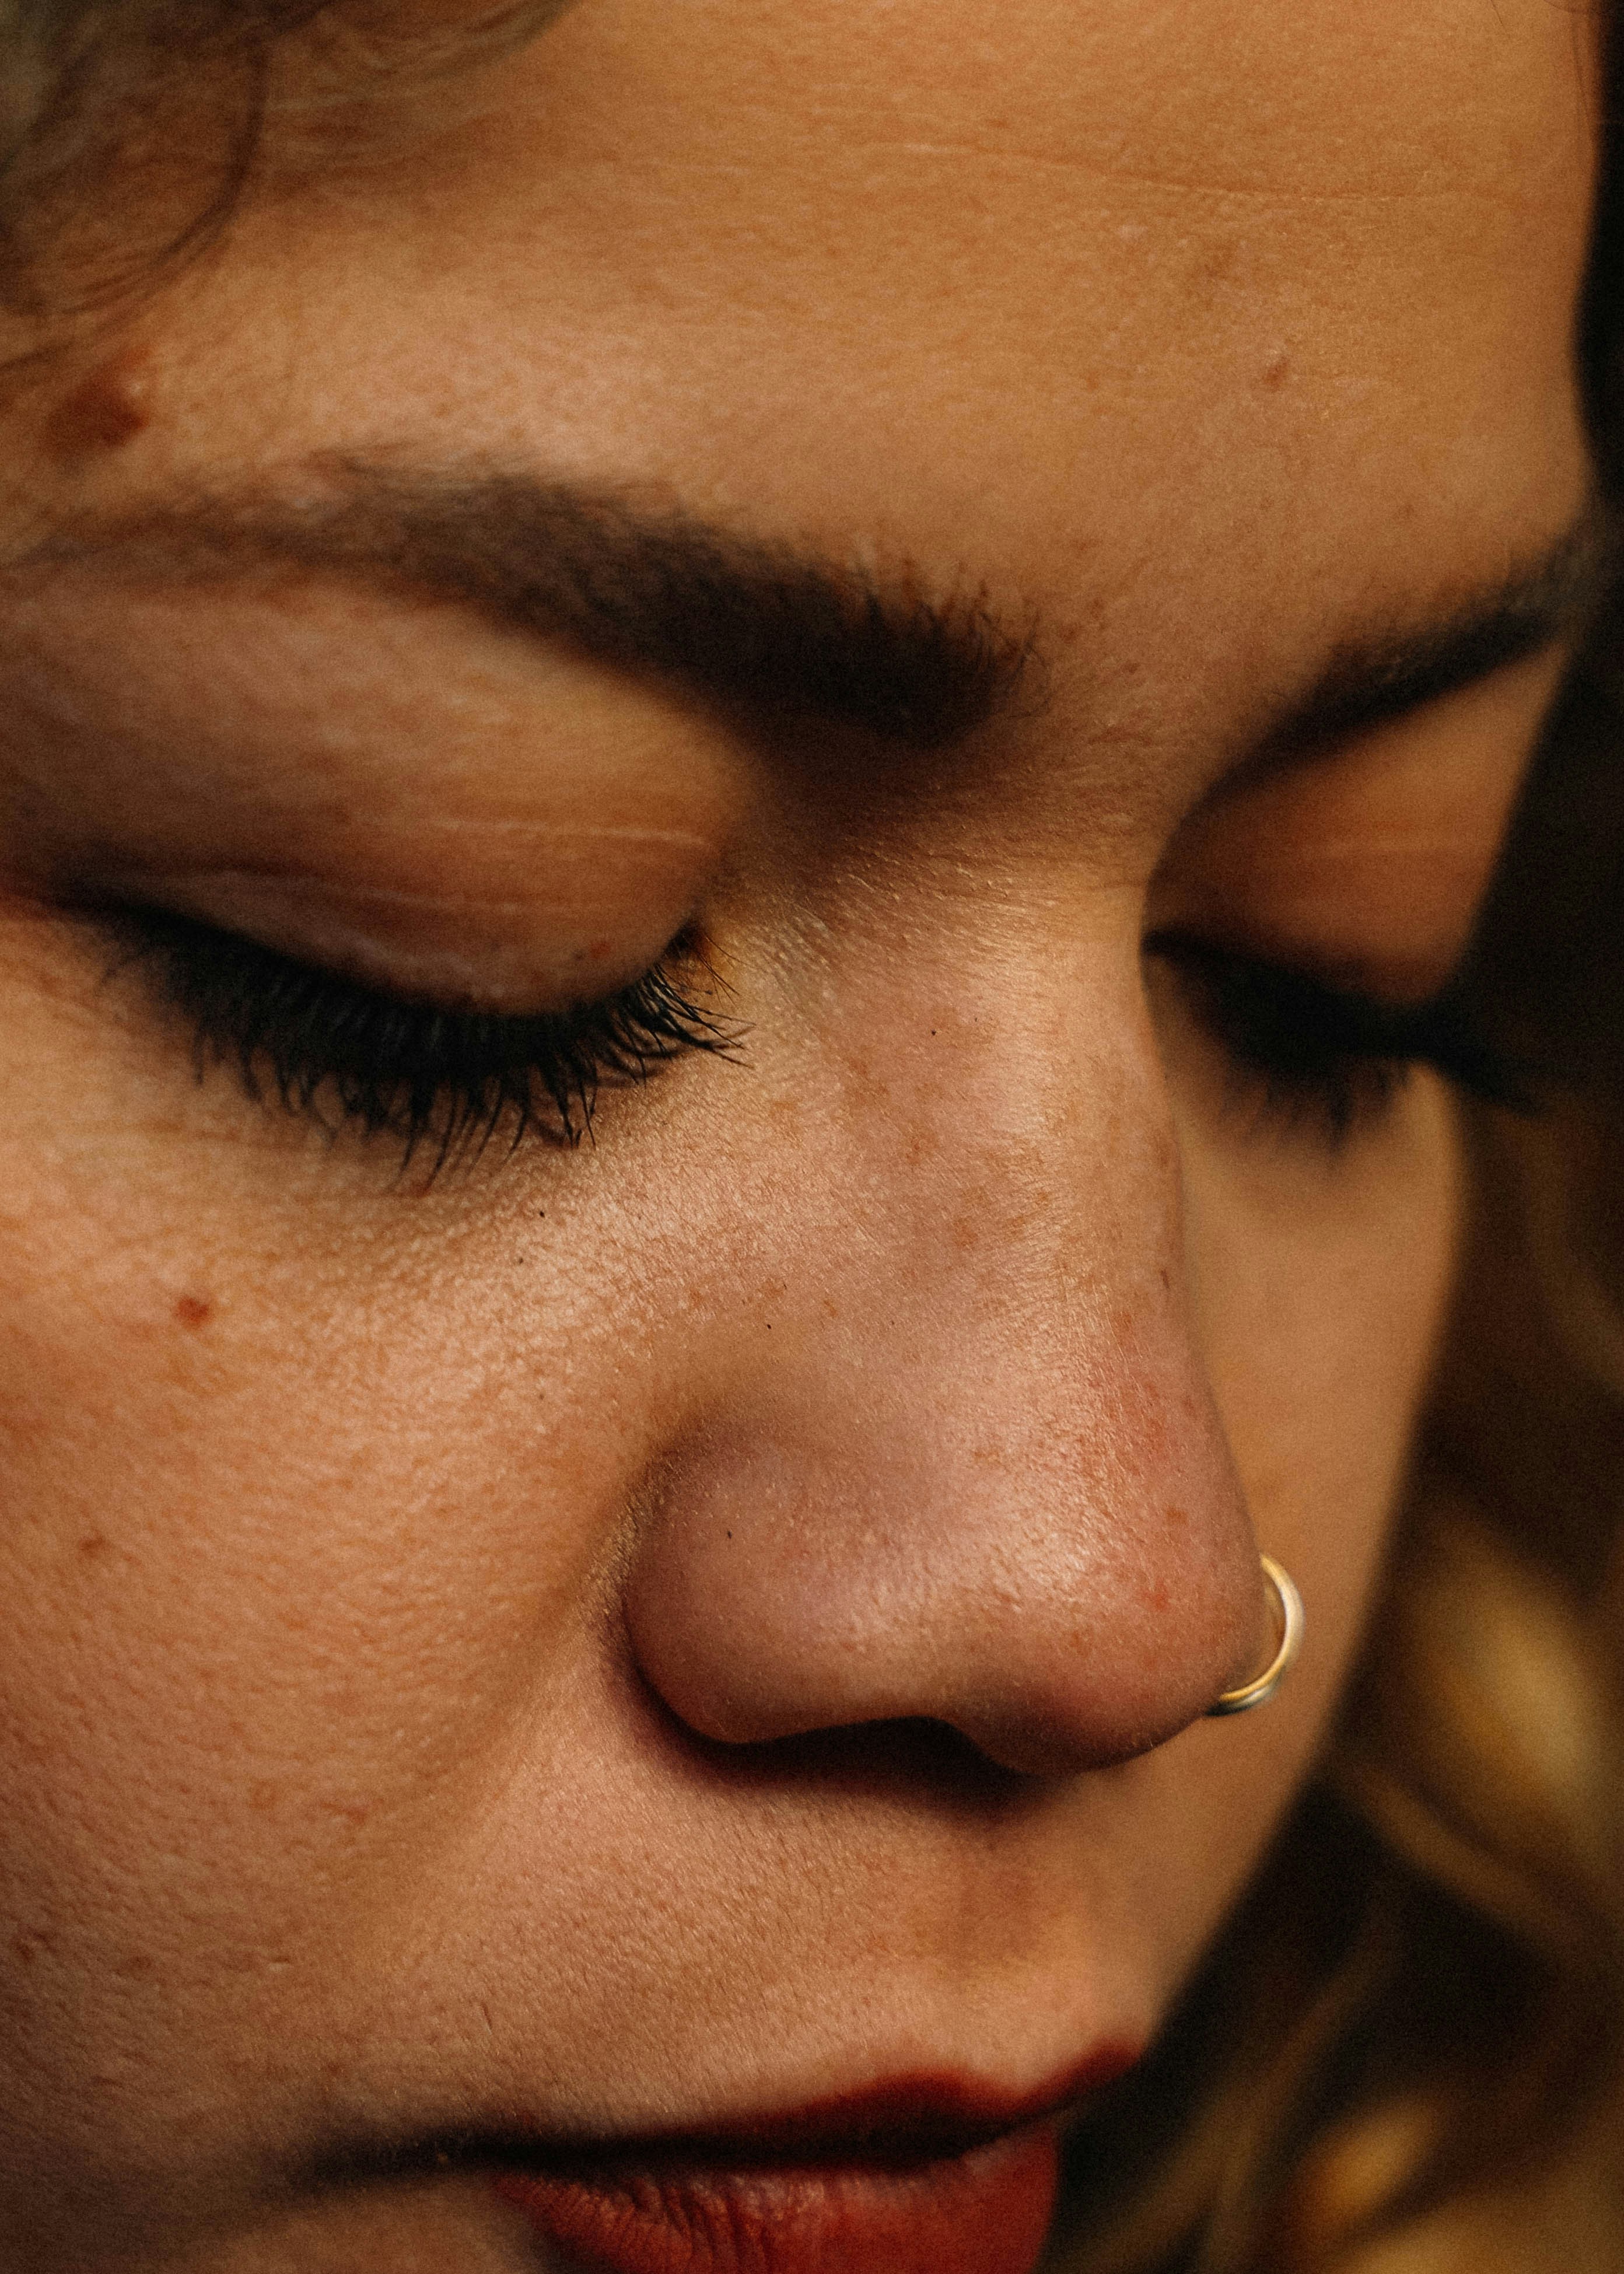 woman-with-silver-nose-piercing